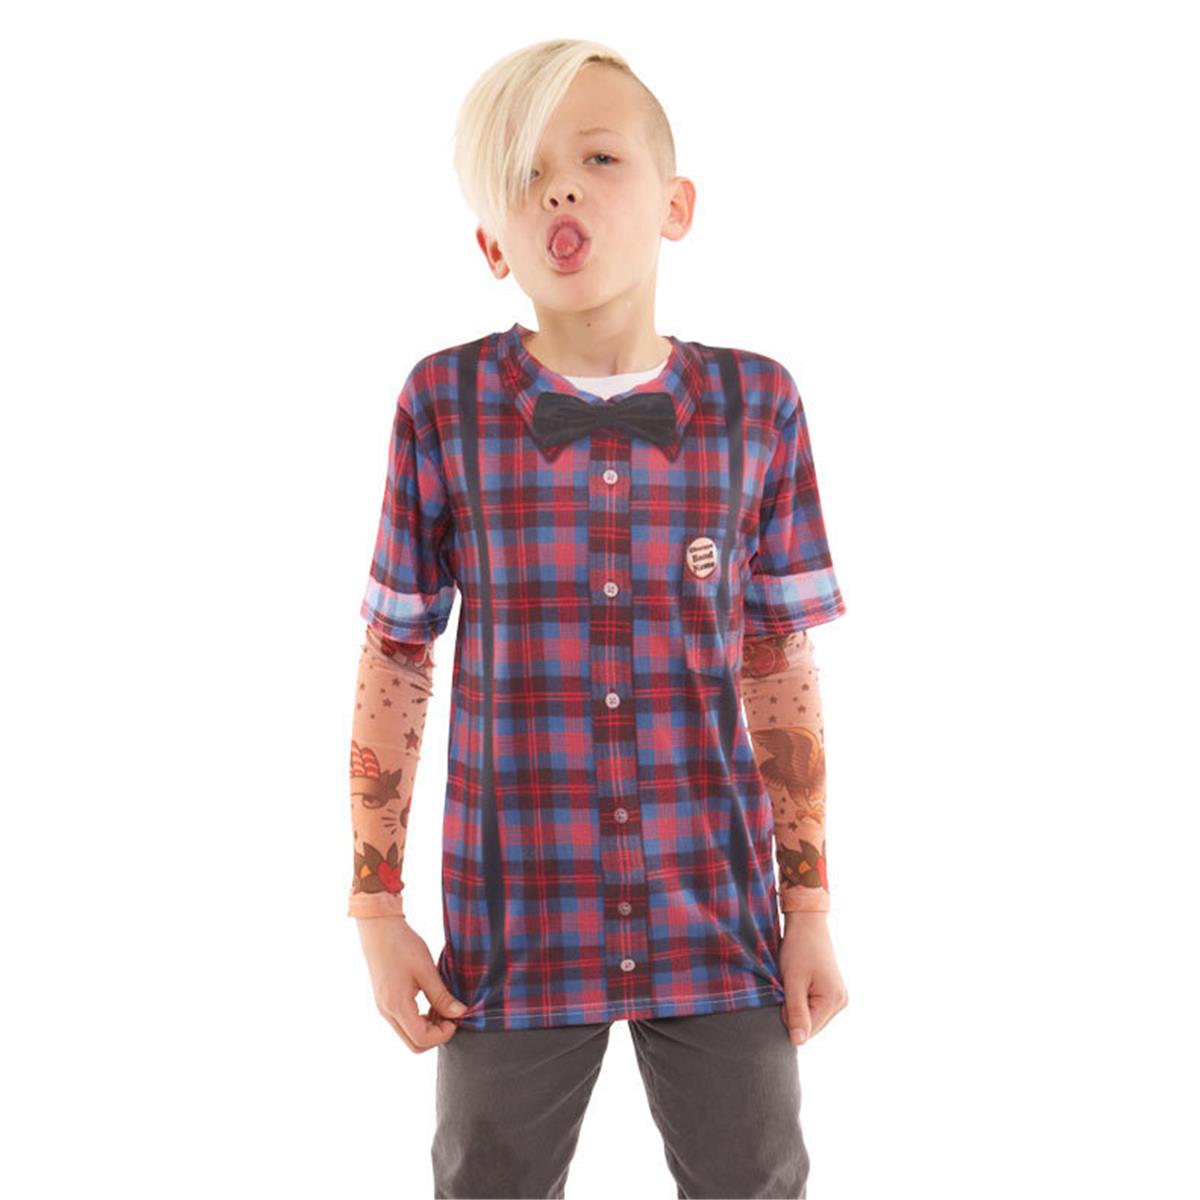 F134202-xl Youth Hipster Bow Tie & Suspenders Tattoo Tee With Mesh Sleeves - Extra Large